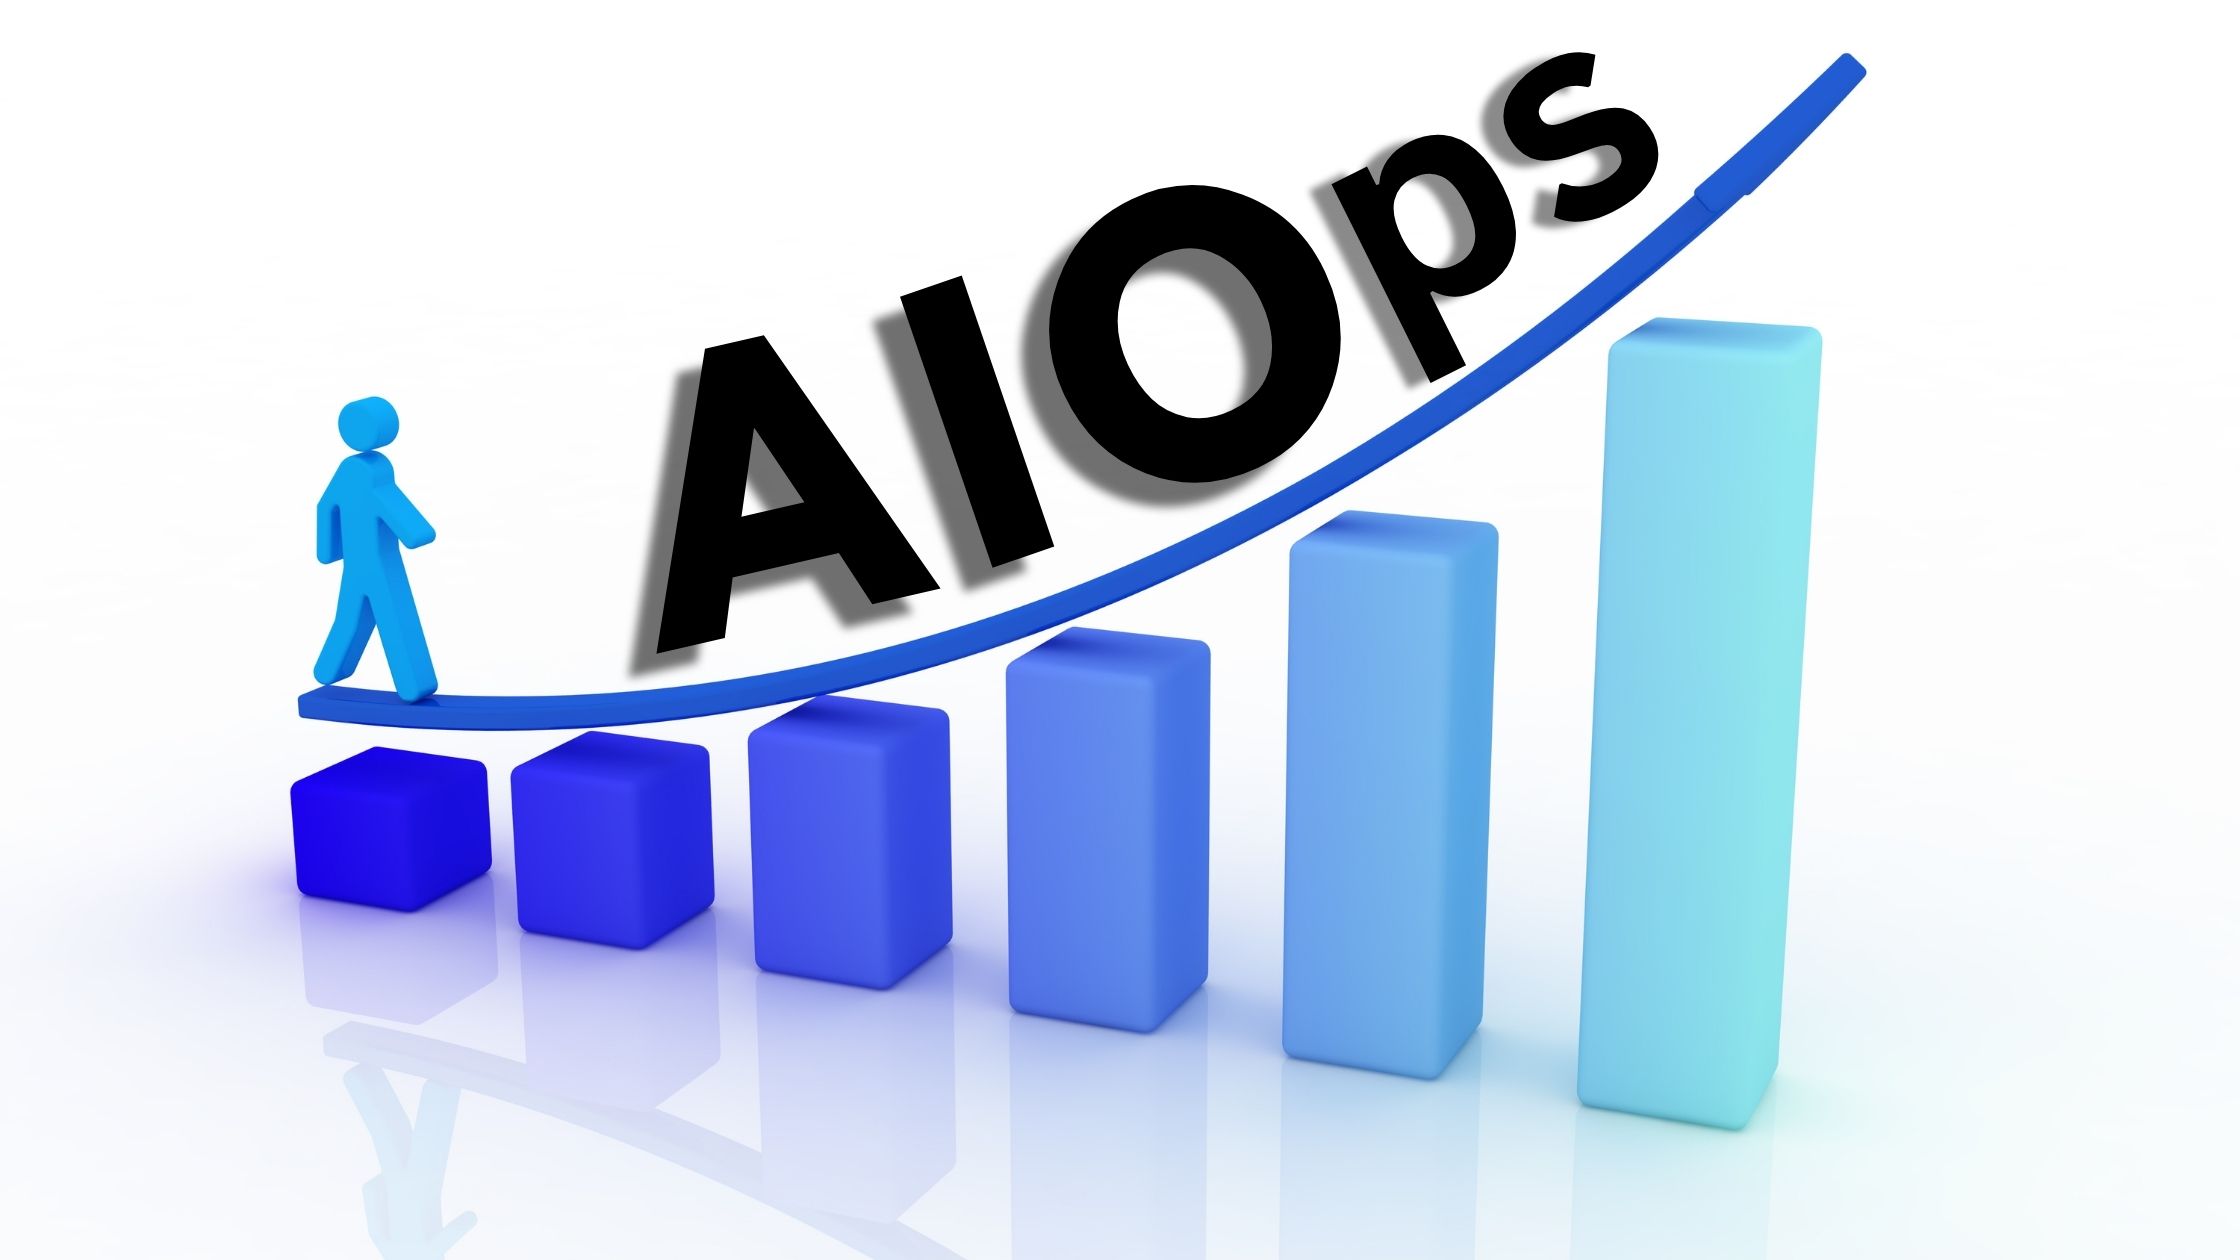 Rising of AIOps